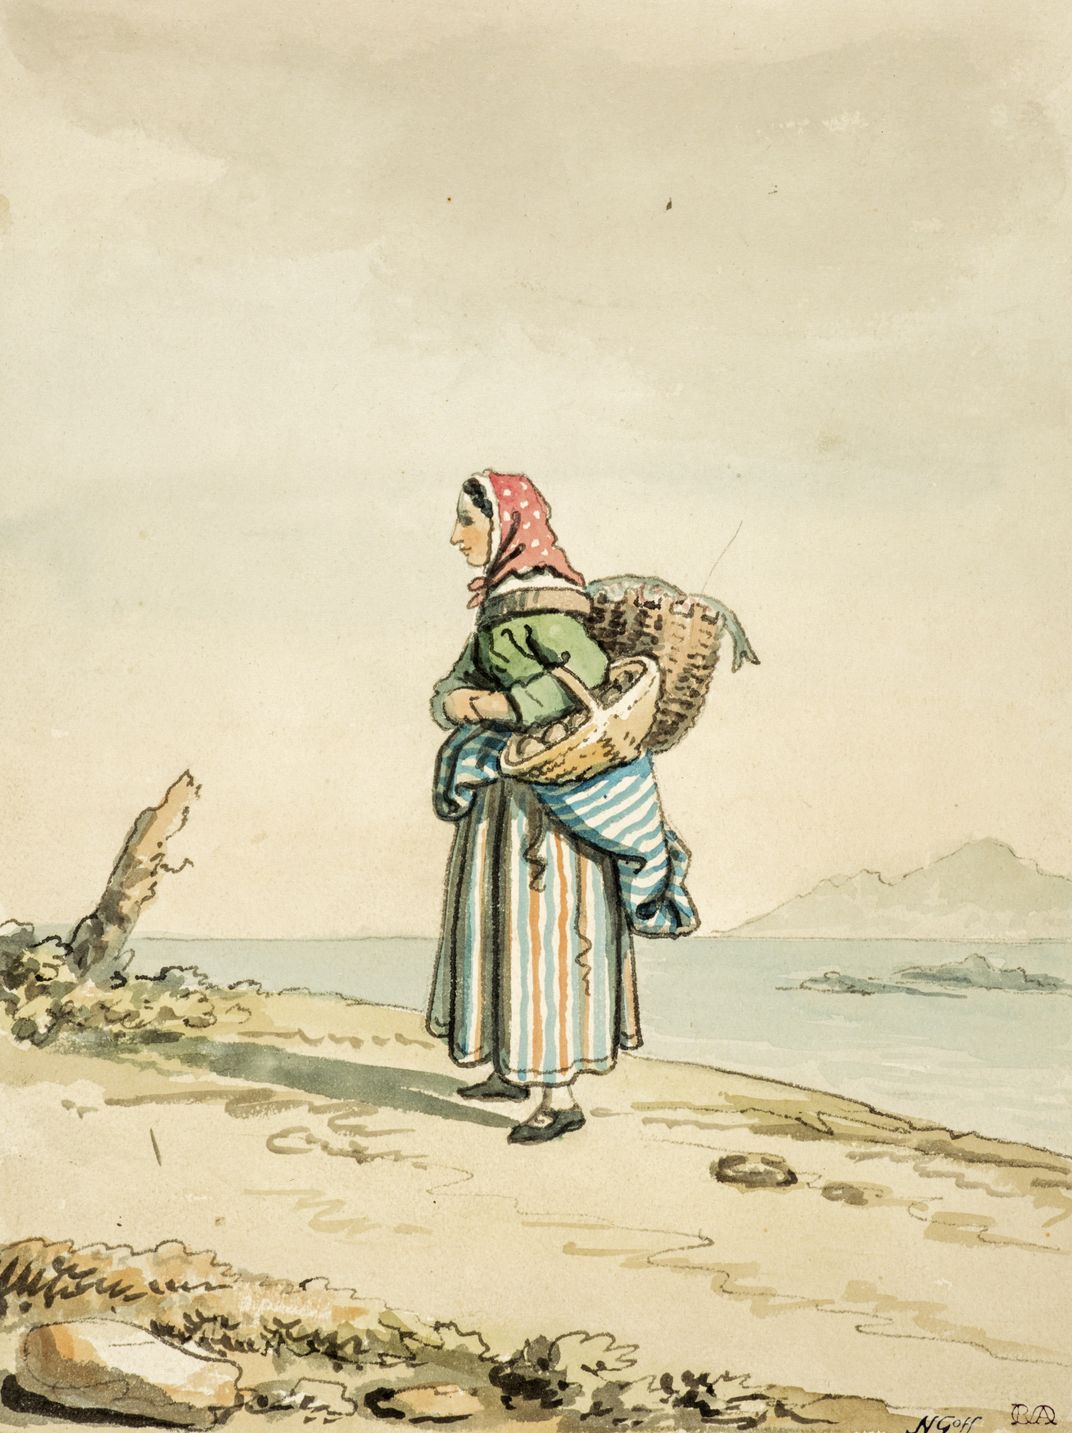 A side-profile, full-length portrait of a woman with a red kerchief, carrying a basket of fish on her back and standing on a beachfront